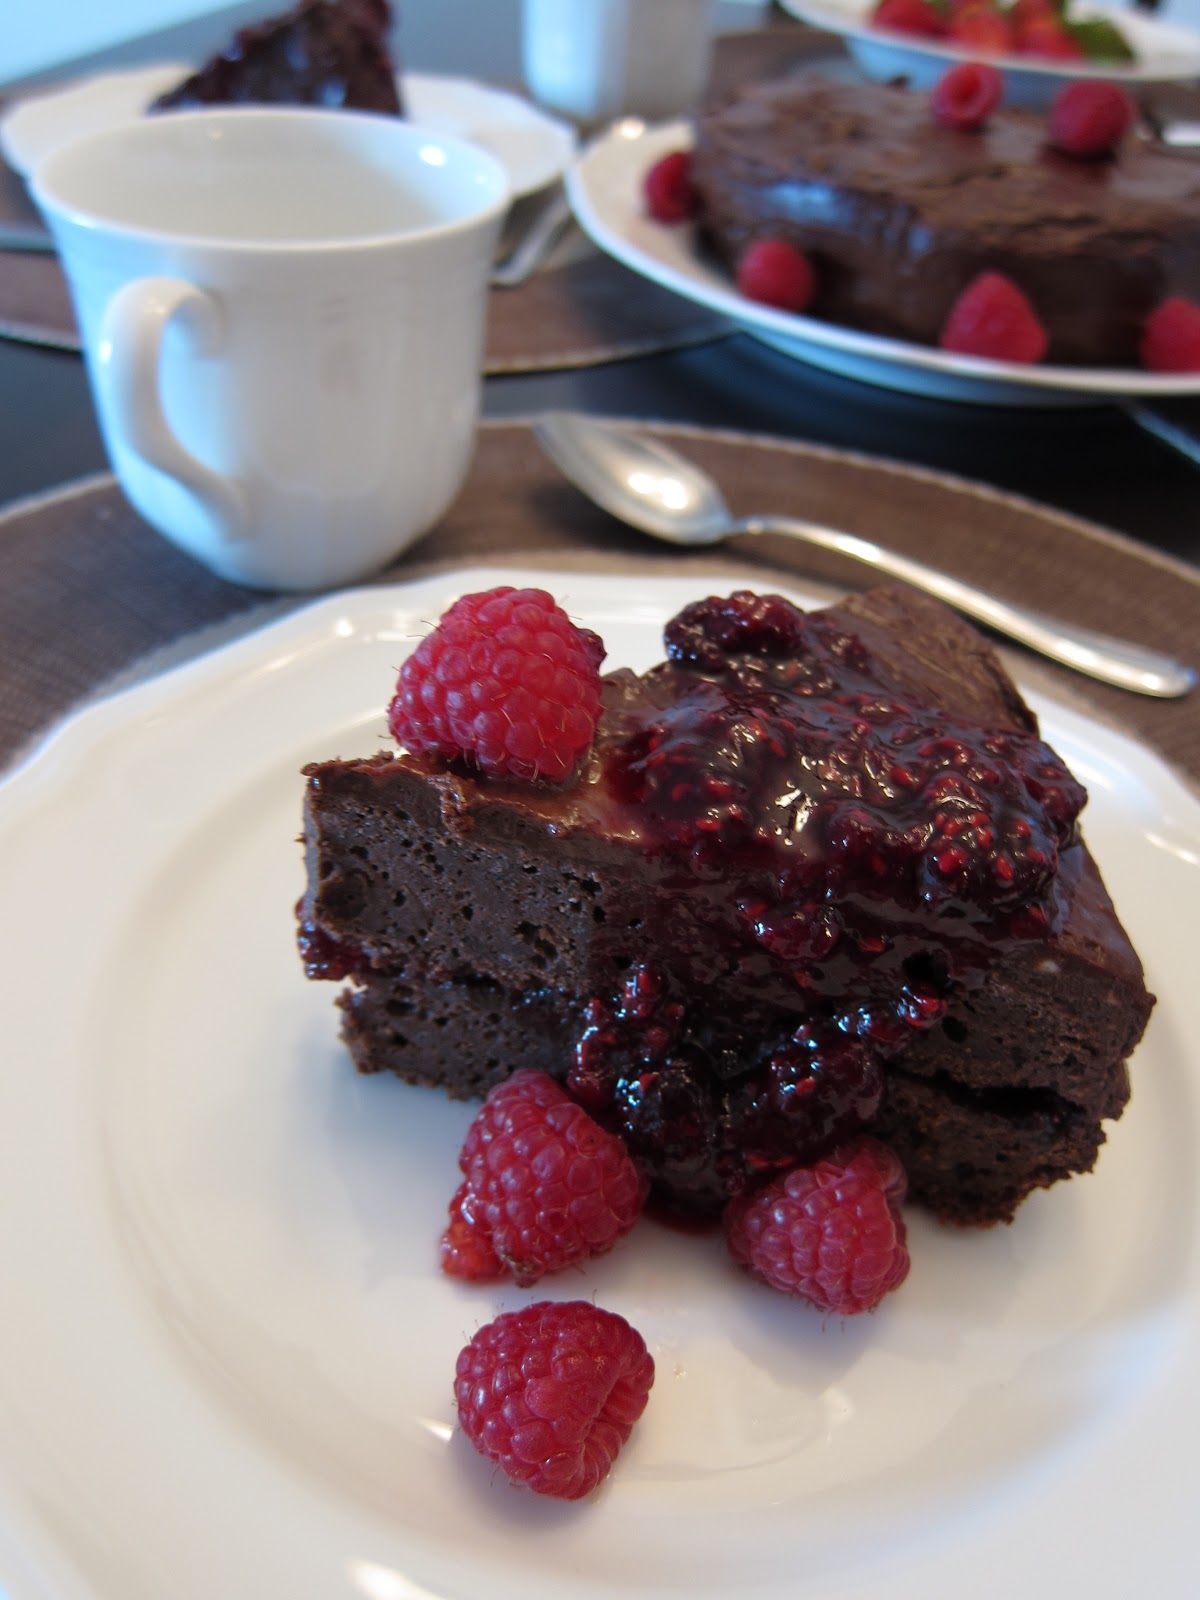 Gluten-Free Chocolate Cake - The Best of this Life